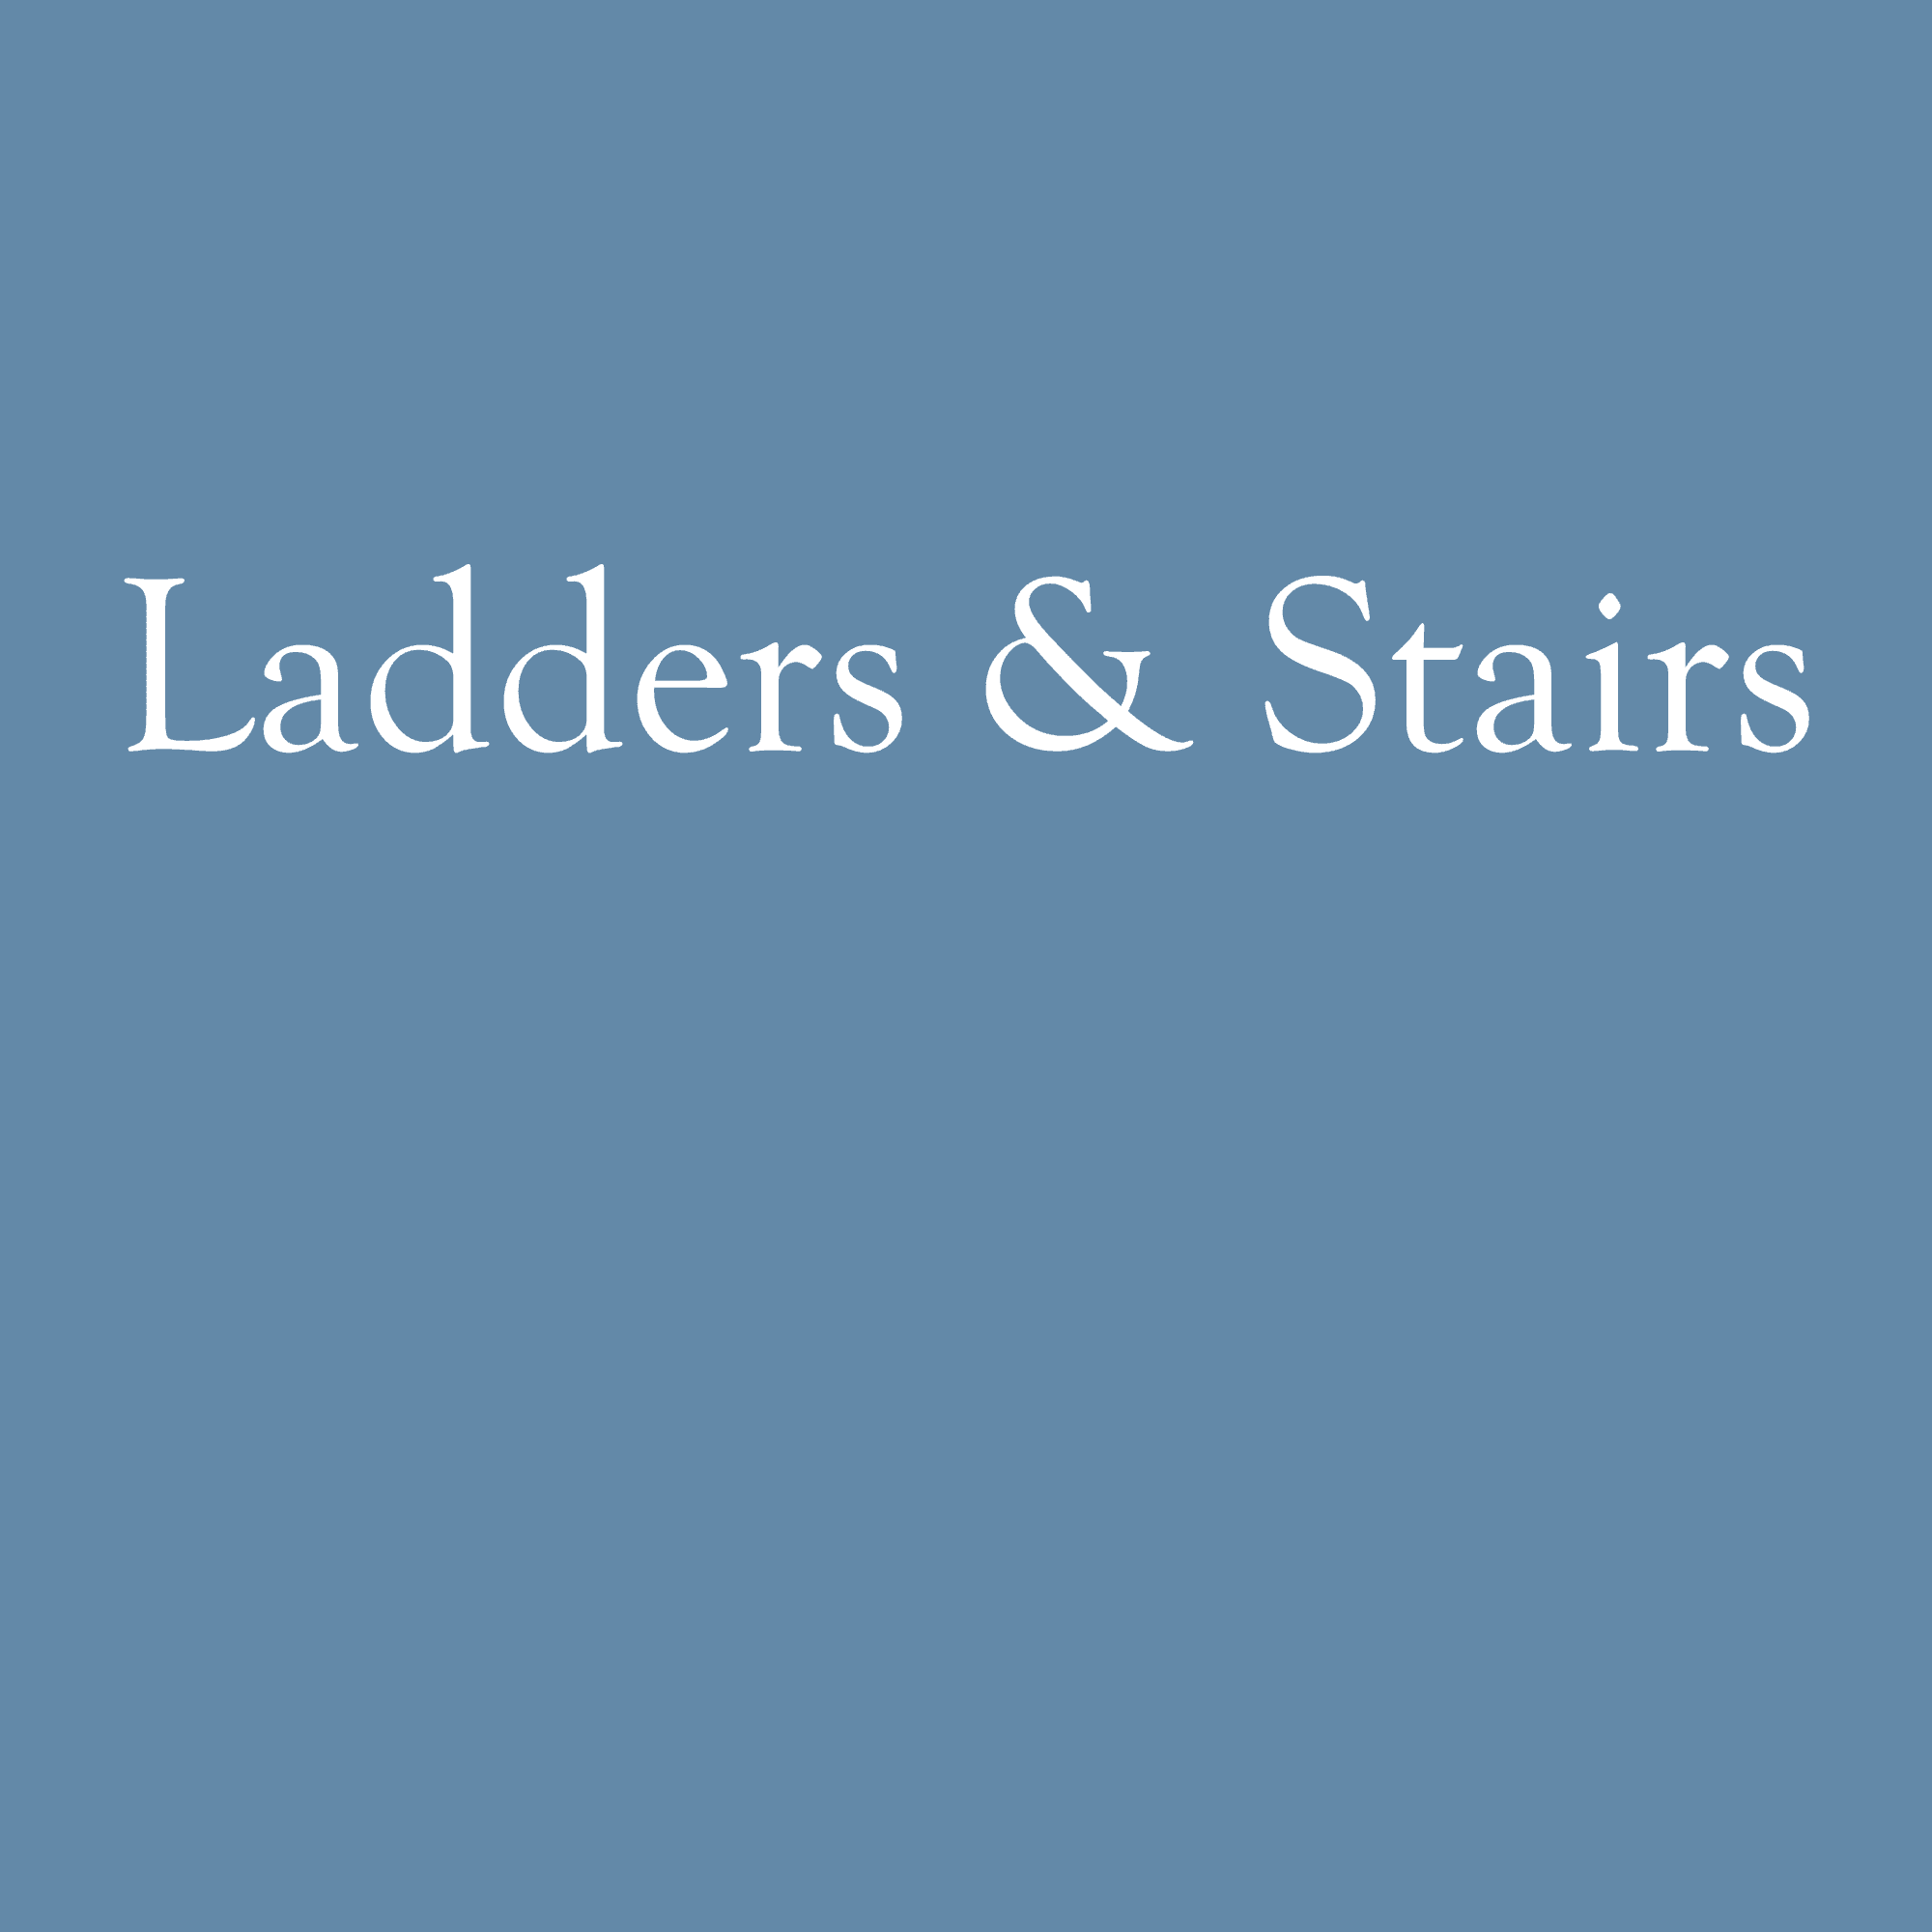 Ladders and Stairs